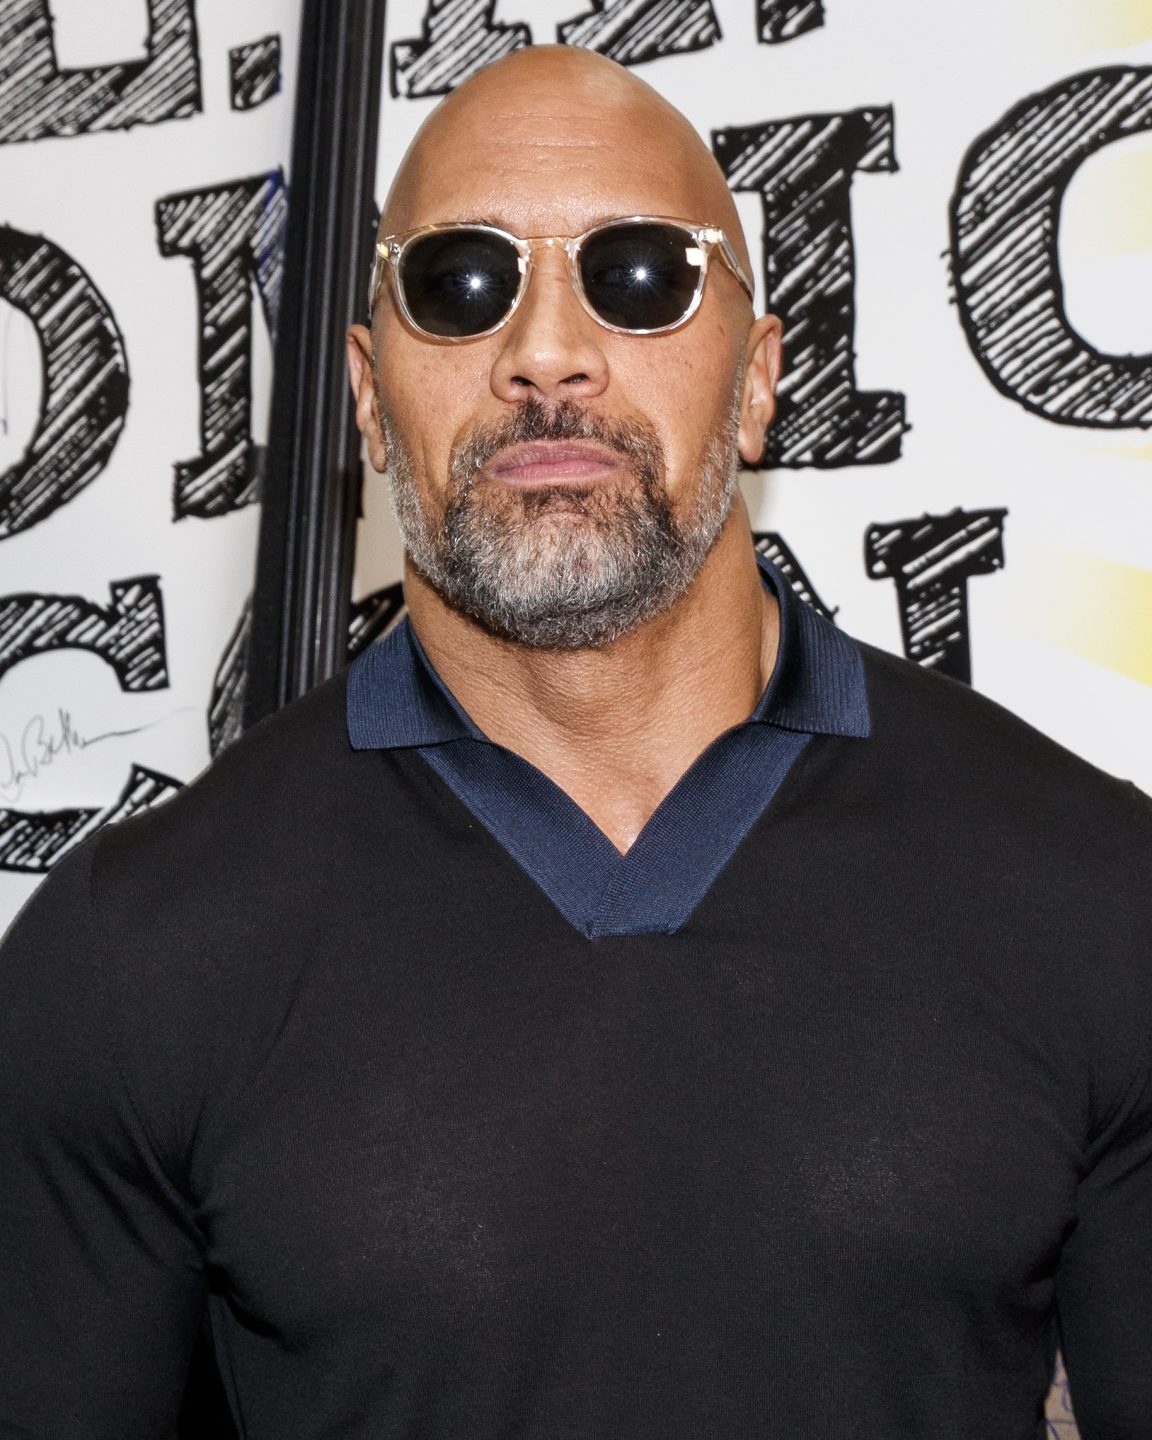 Dwayne Johnson at Stan Lee's Los Angeles Comic Con (Sony Pictures)